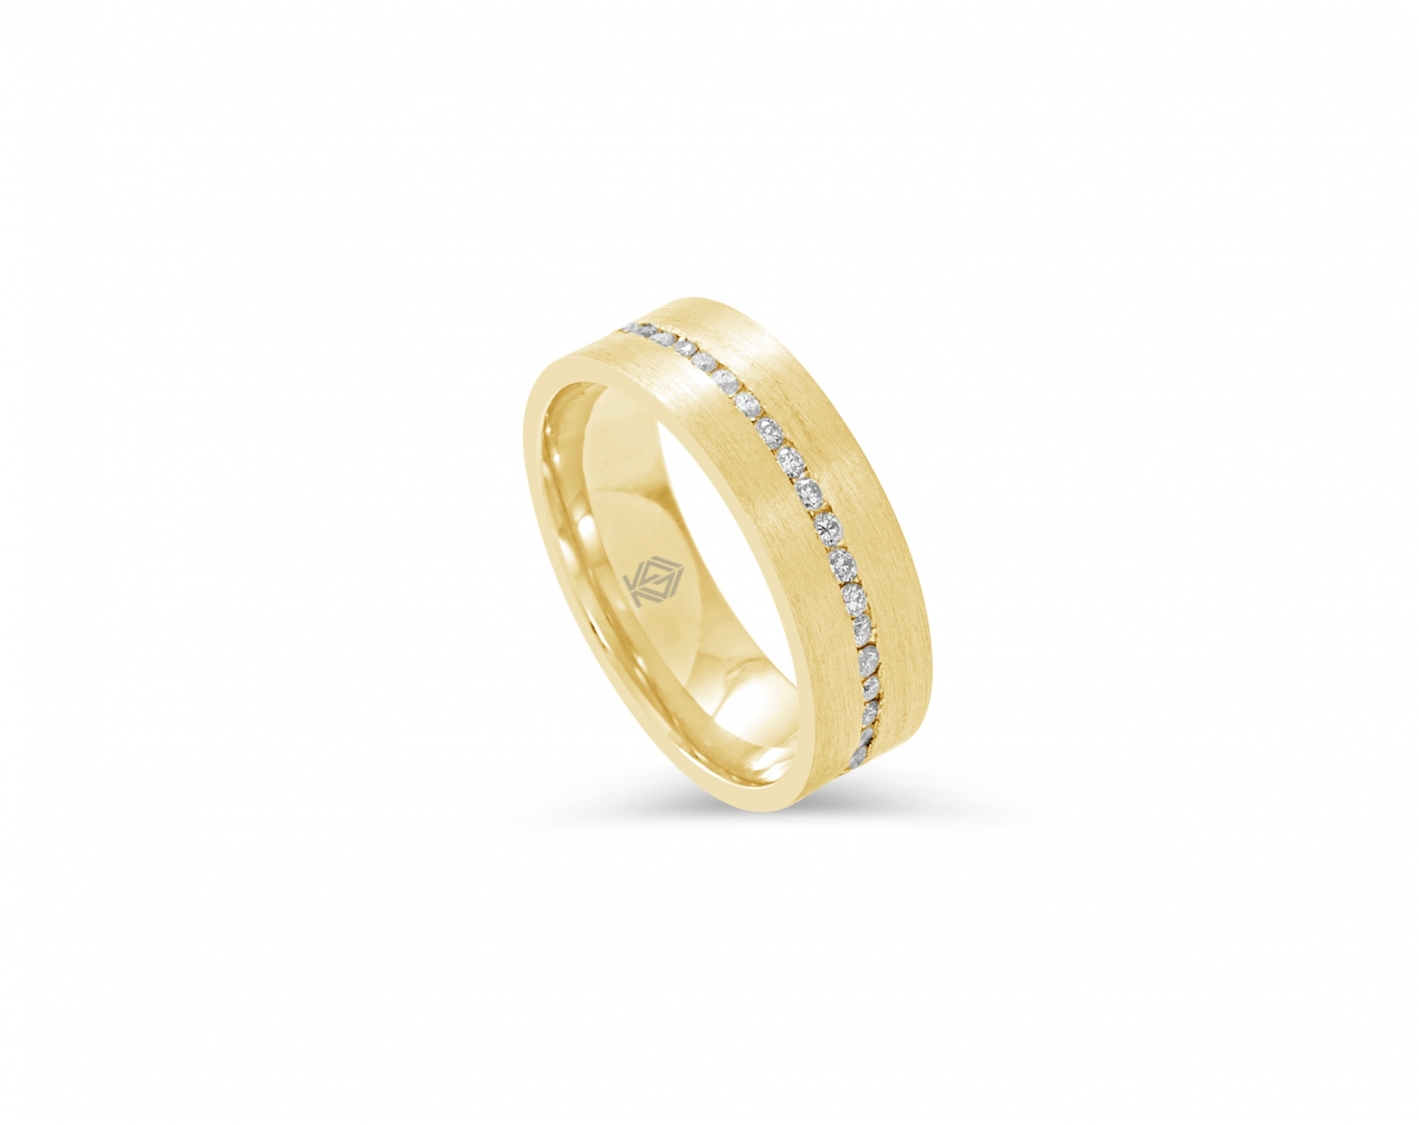 18k yellow gold 6mm matte wedding band with diamonds and a shiny inlay Photos & images